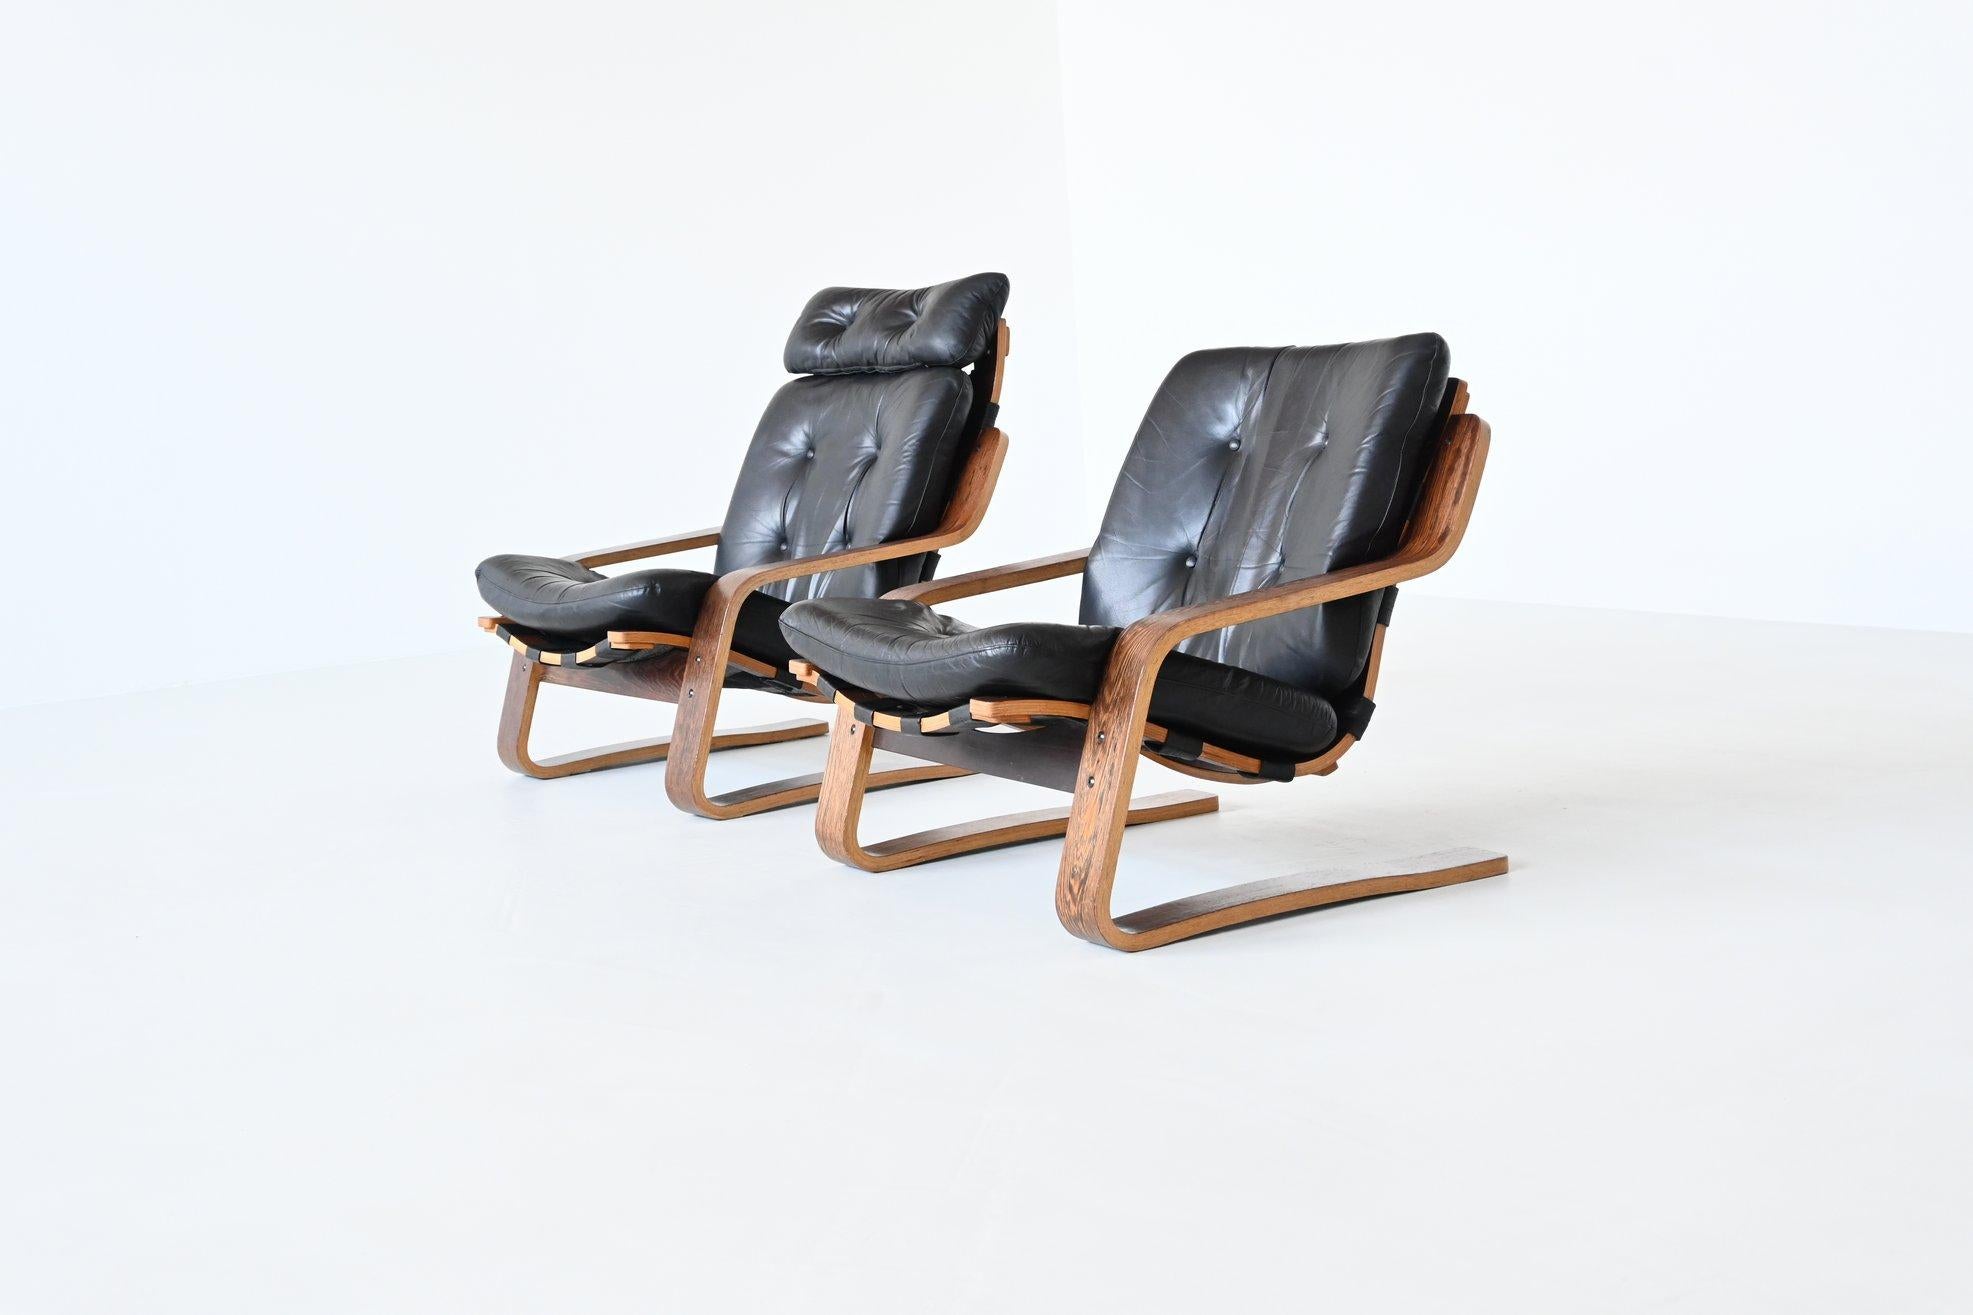 Superb shaped pair of plywood Scandinavian lounge chairs in the style of Ingmar Relling, Norway 1970. This beautiful but unknown design is a combination of designs by Ingmar Relling from Norway because of the wood, leather and canvas and Alvar Aalto